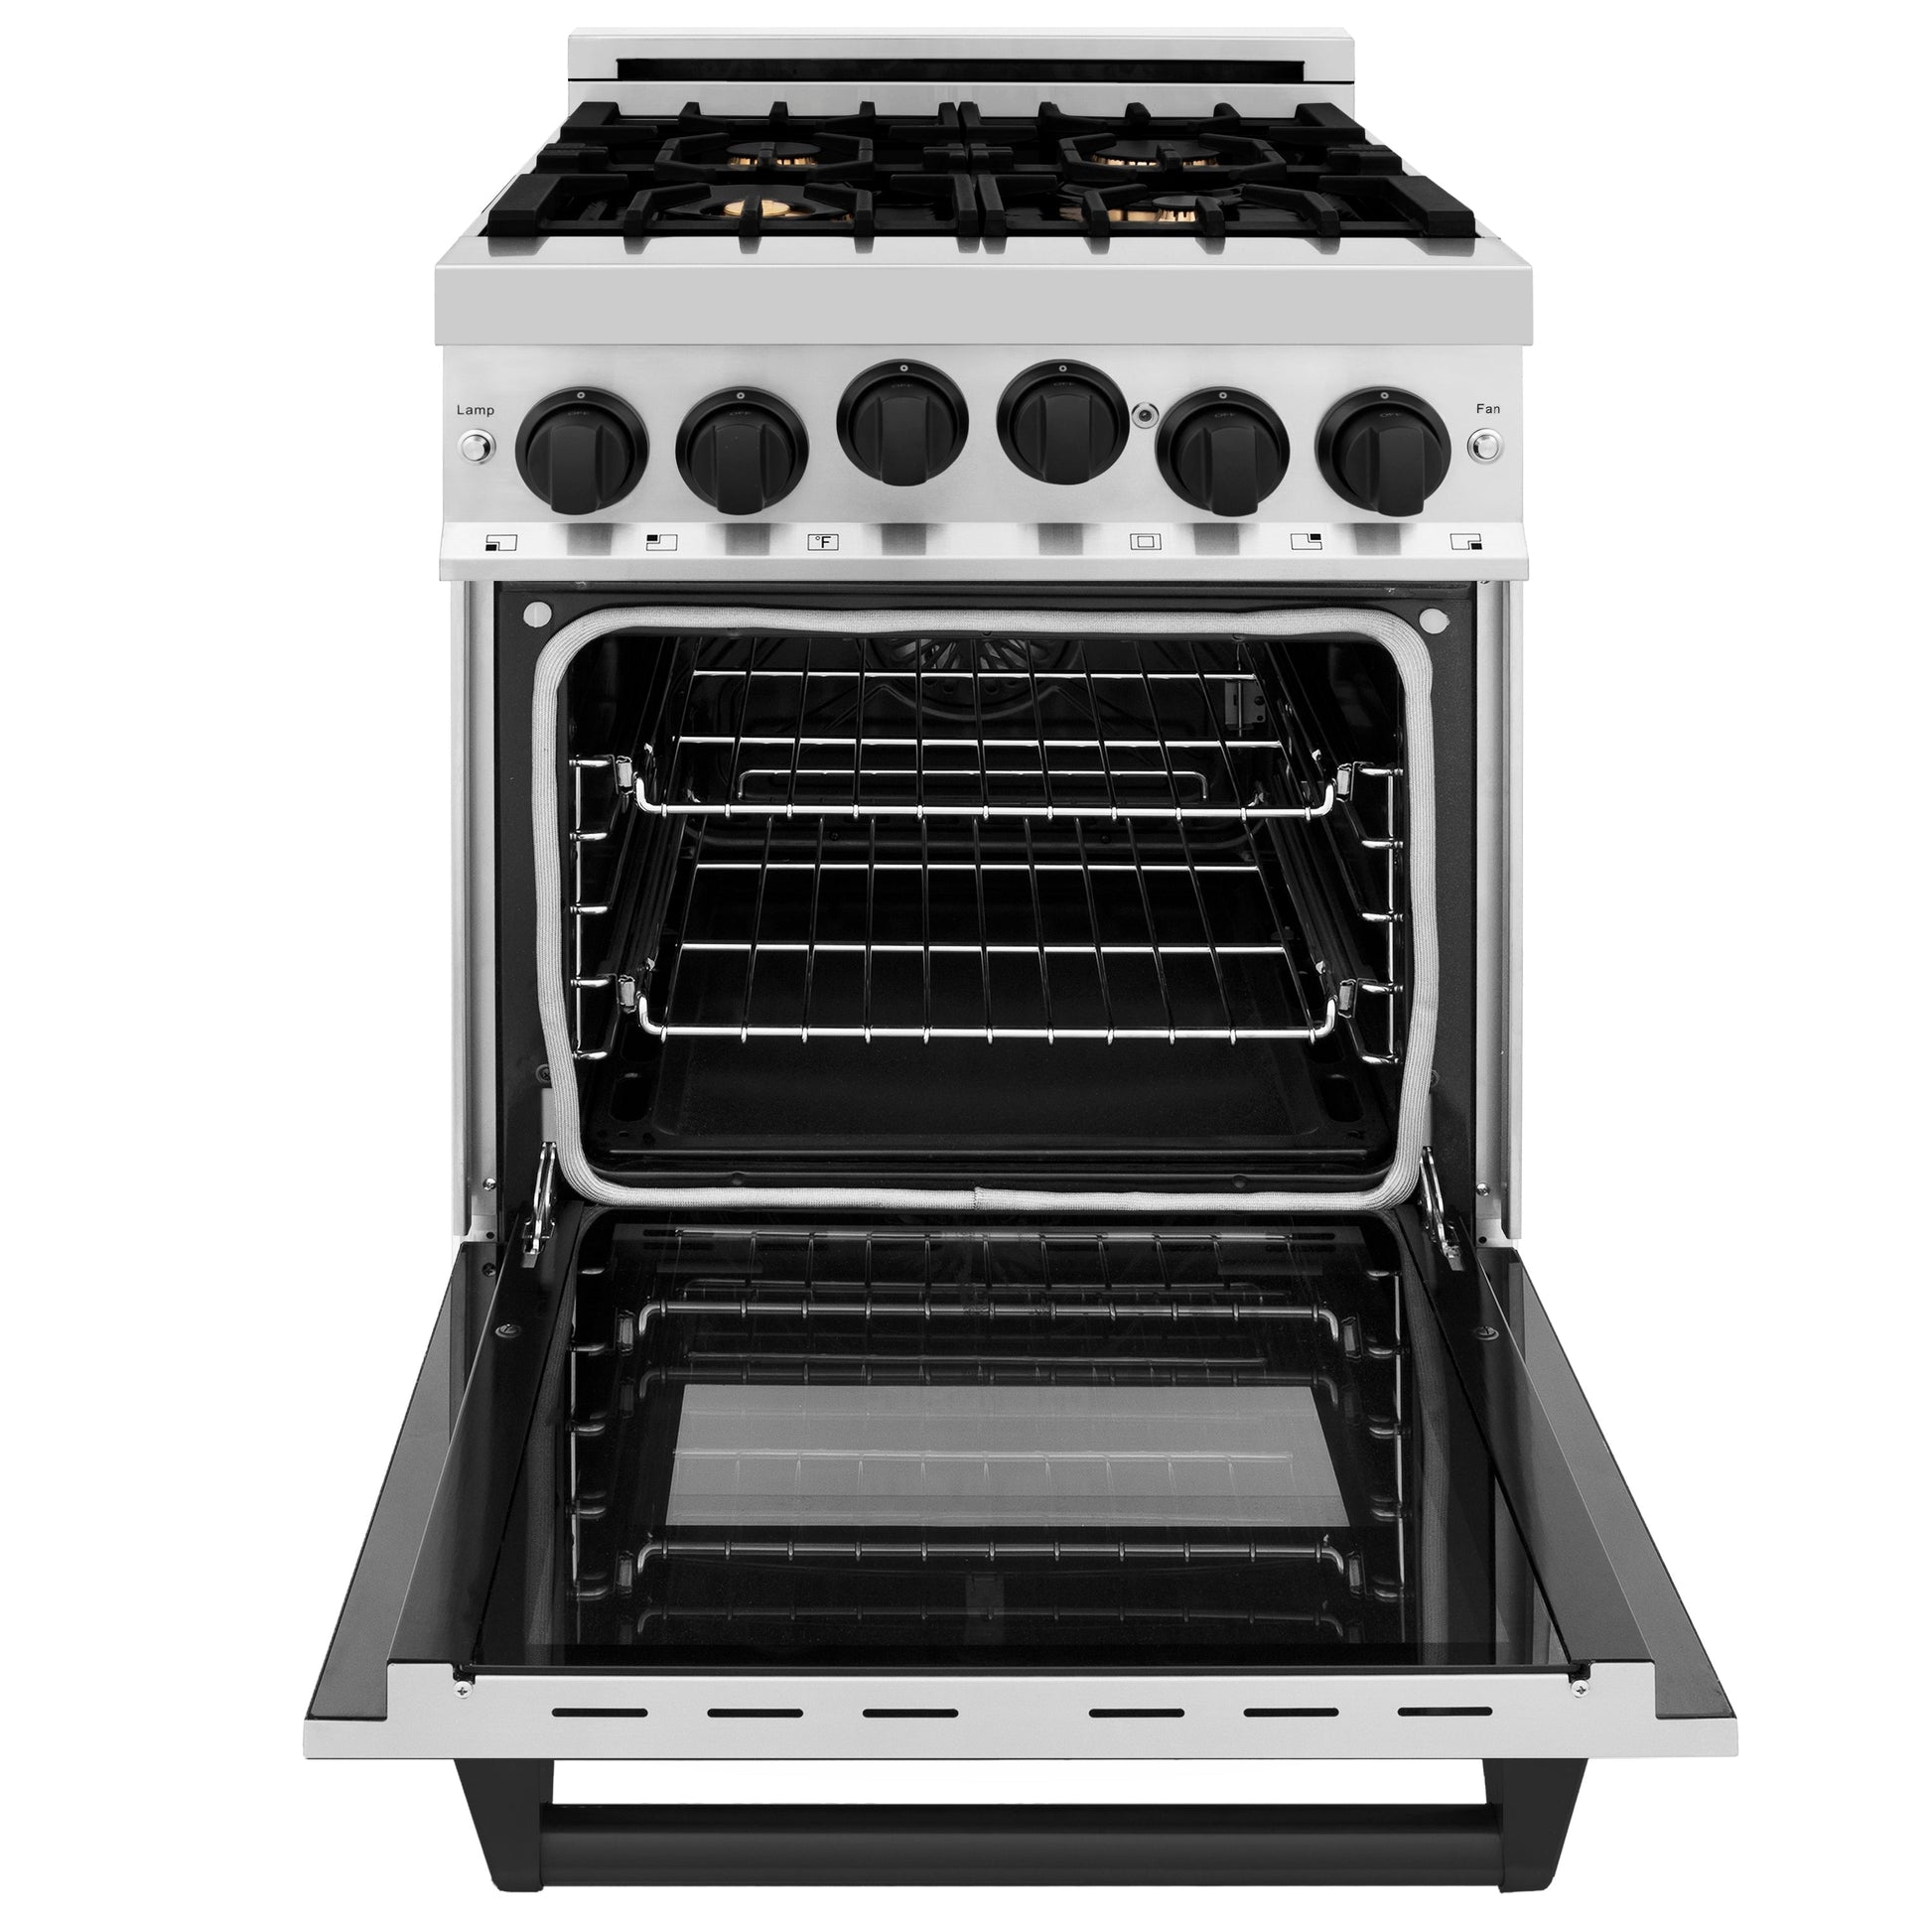 ZLINE Autograph Edition 24" Range with Gas Stove and Oven - Stainless Steel with Accents